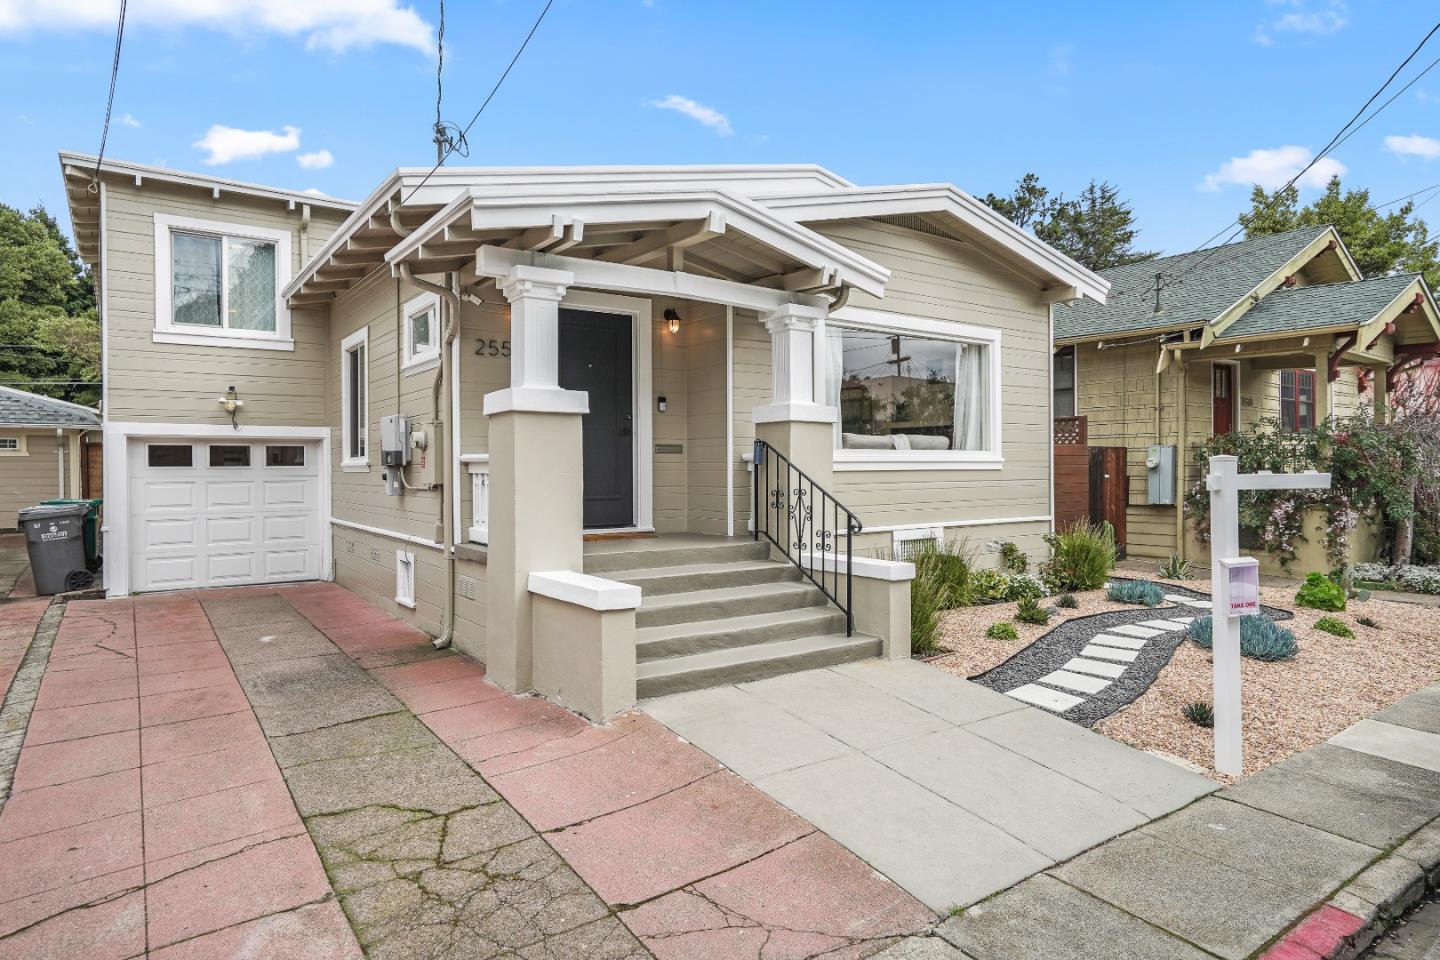 Photo of 2554 Pleasant St in Oakland, CA